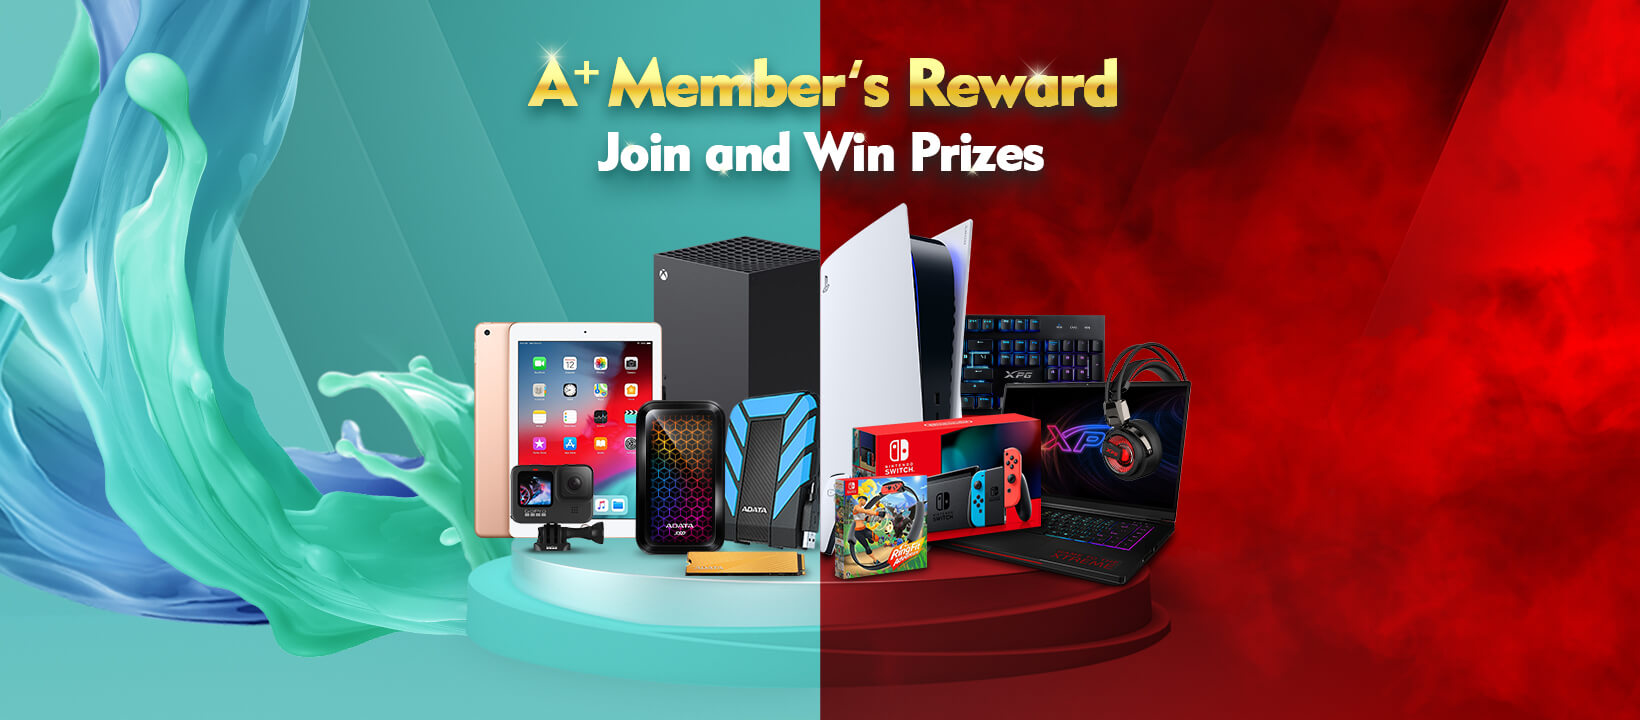 ADATA A+ Member's Reward Join and Win Prizes